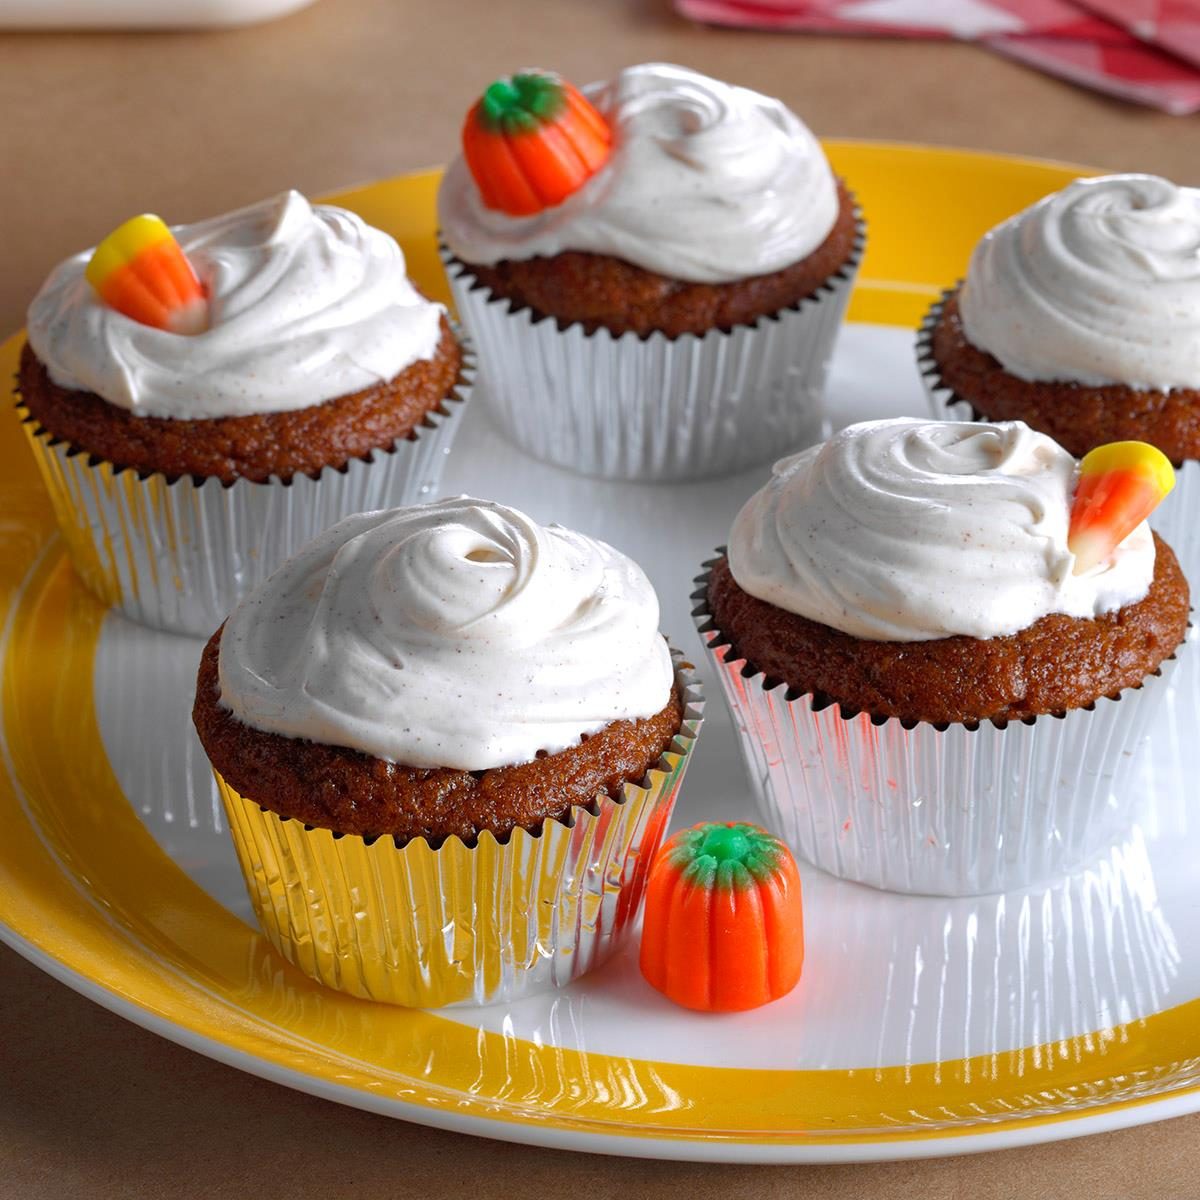 Pumpkin Cupcakes With Spiced Frosting Exps Hca17 169542 B10 20 2b 7